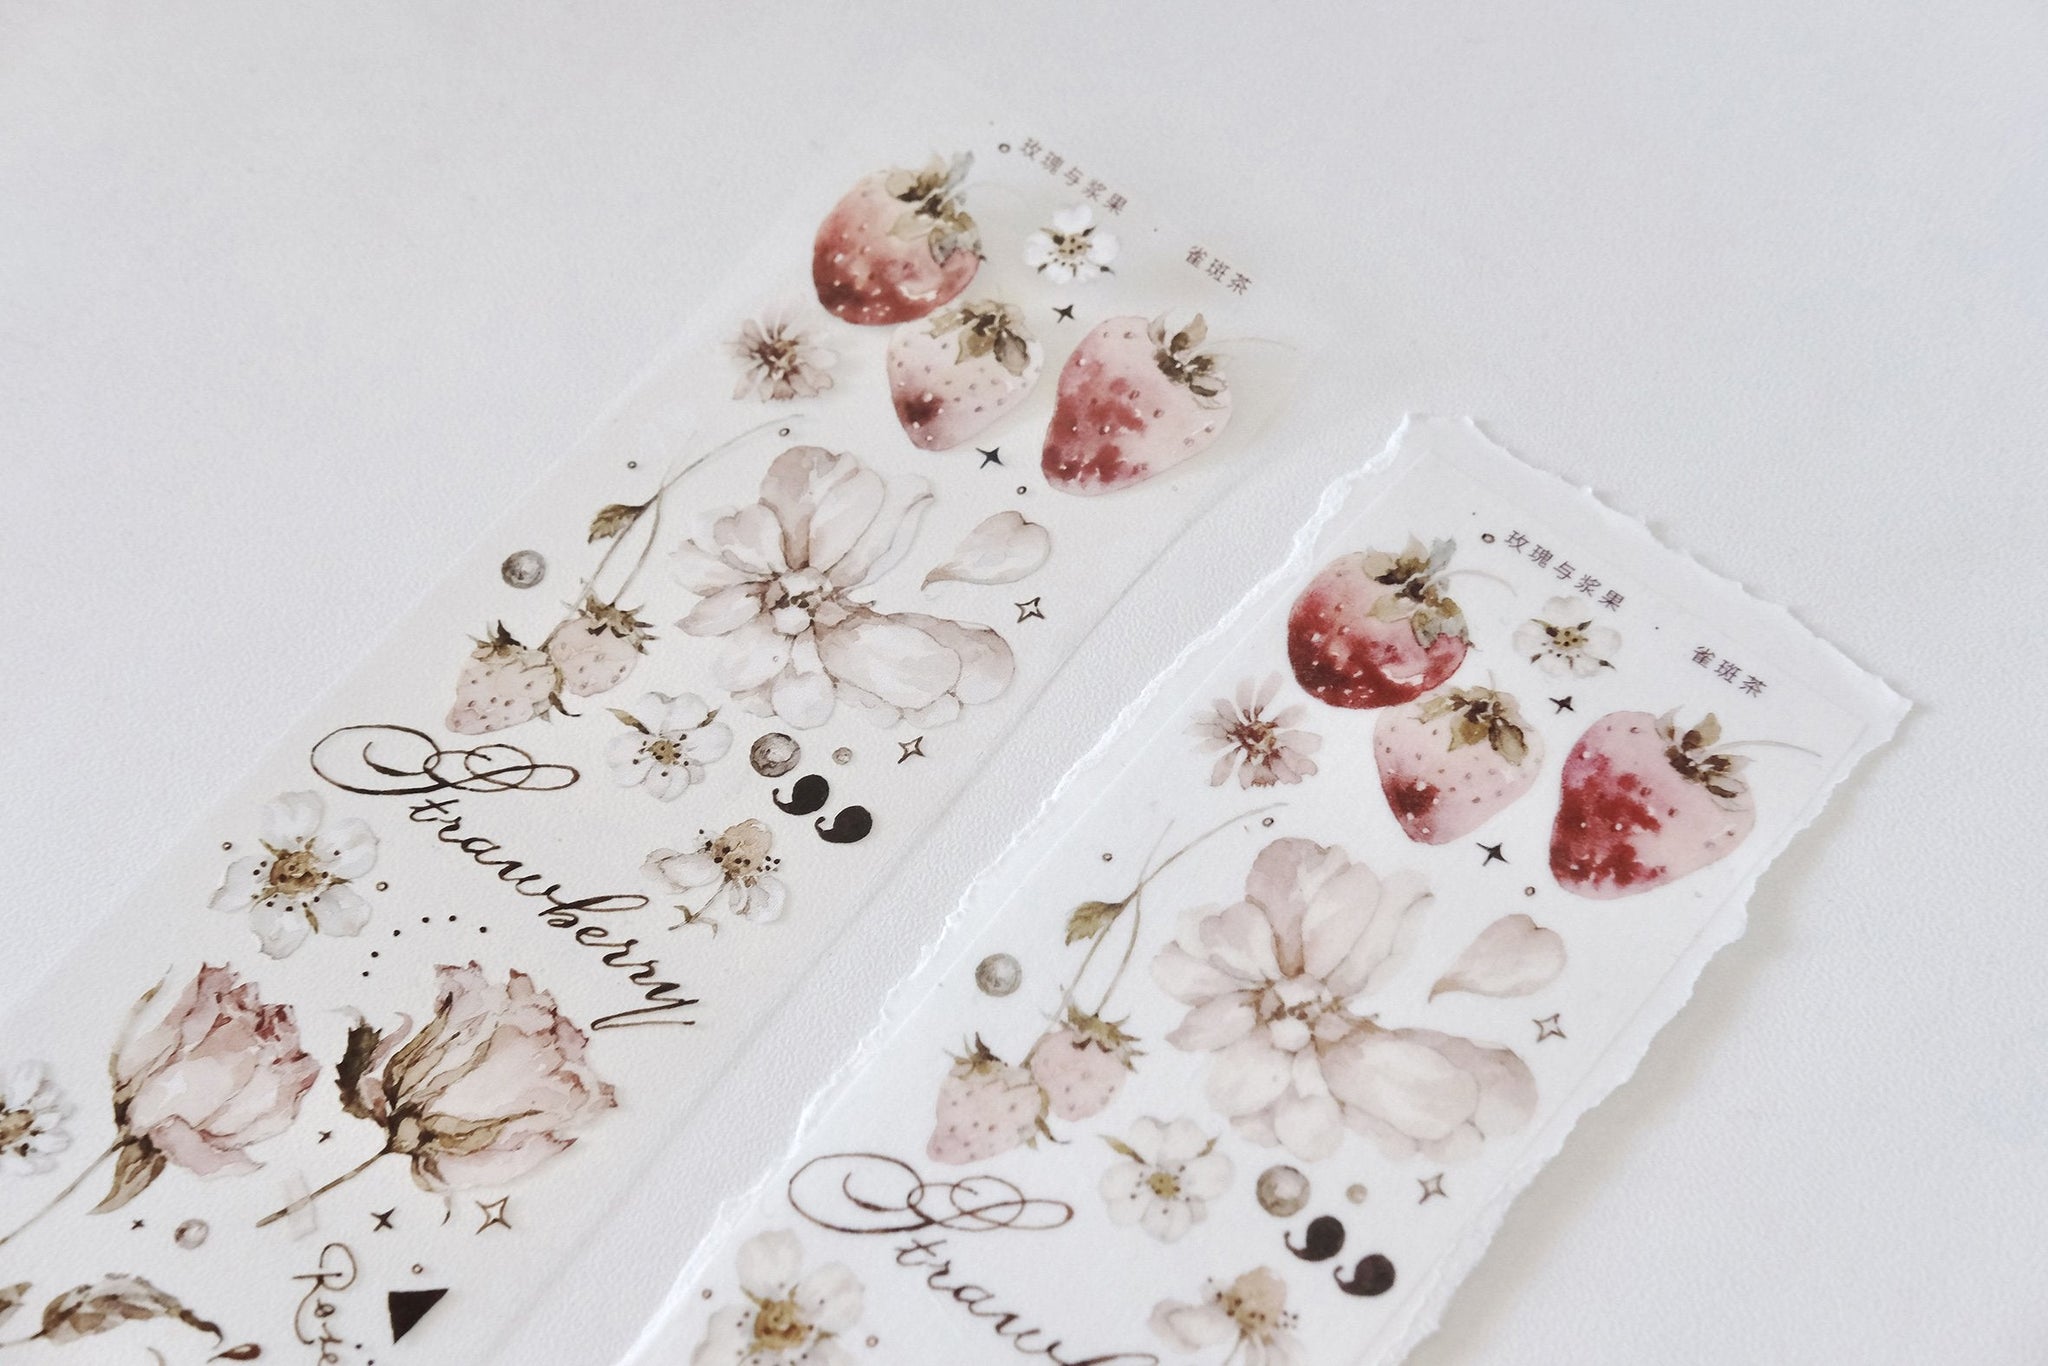 Freckles Tea Tape: Roses and Berries